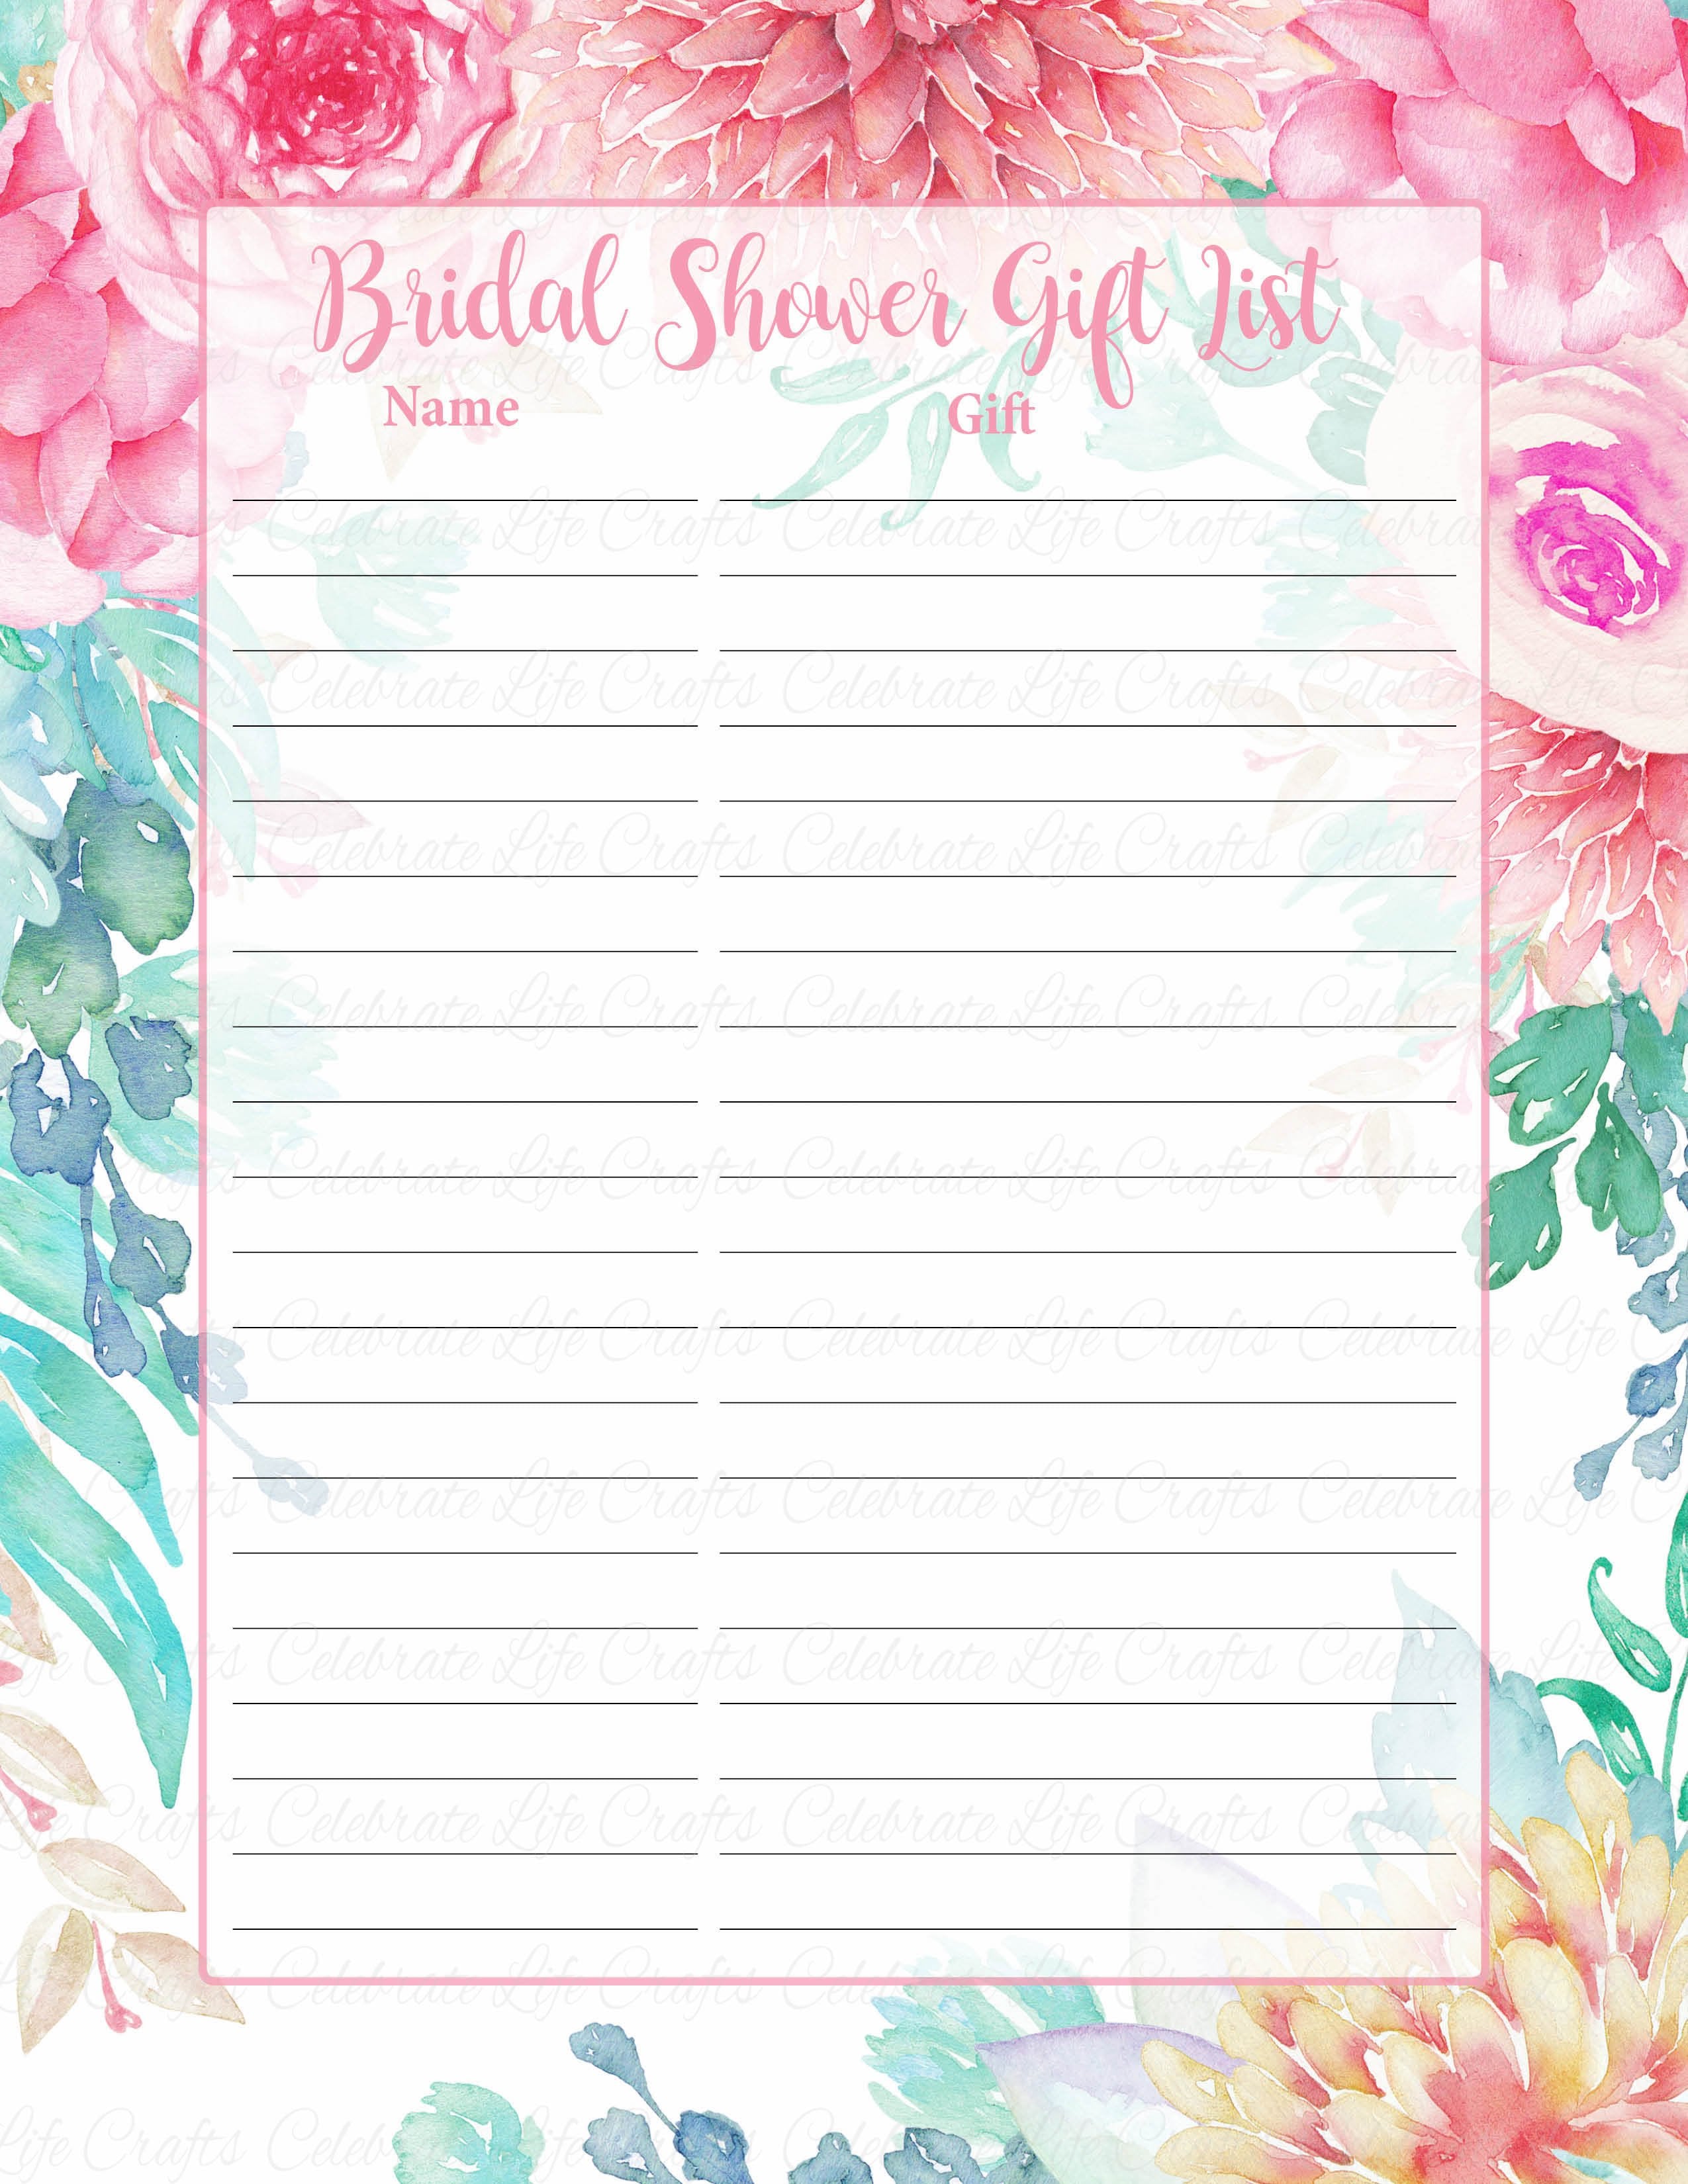 free-printable-baby-shower-gift-list-template-free-baby-shower-photo-booth-props-printable